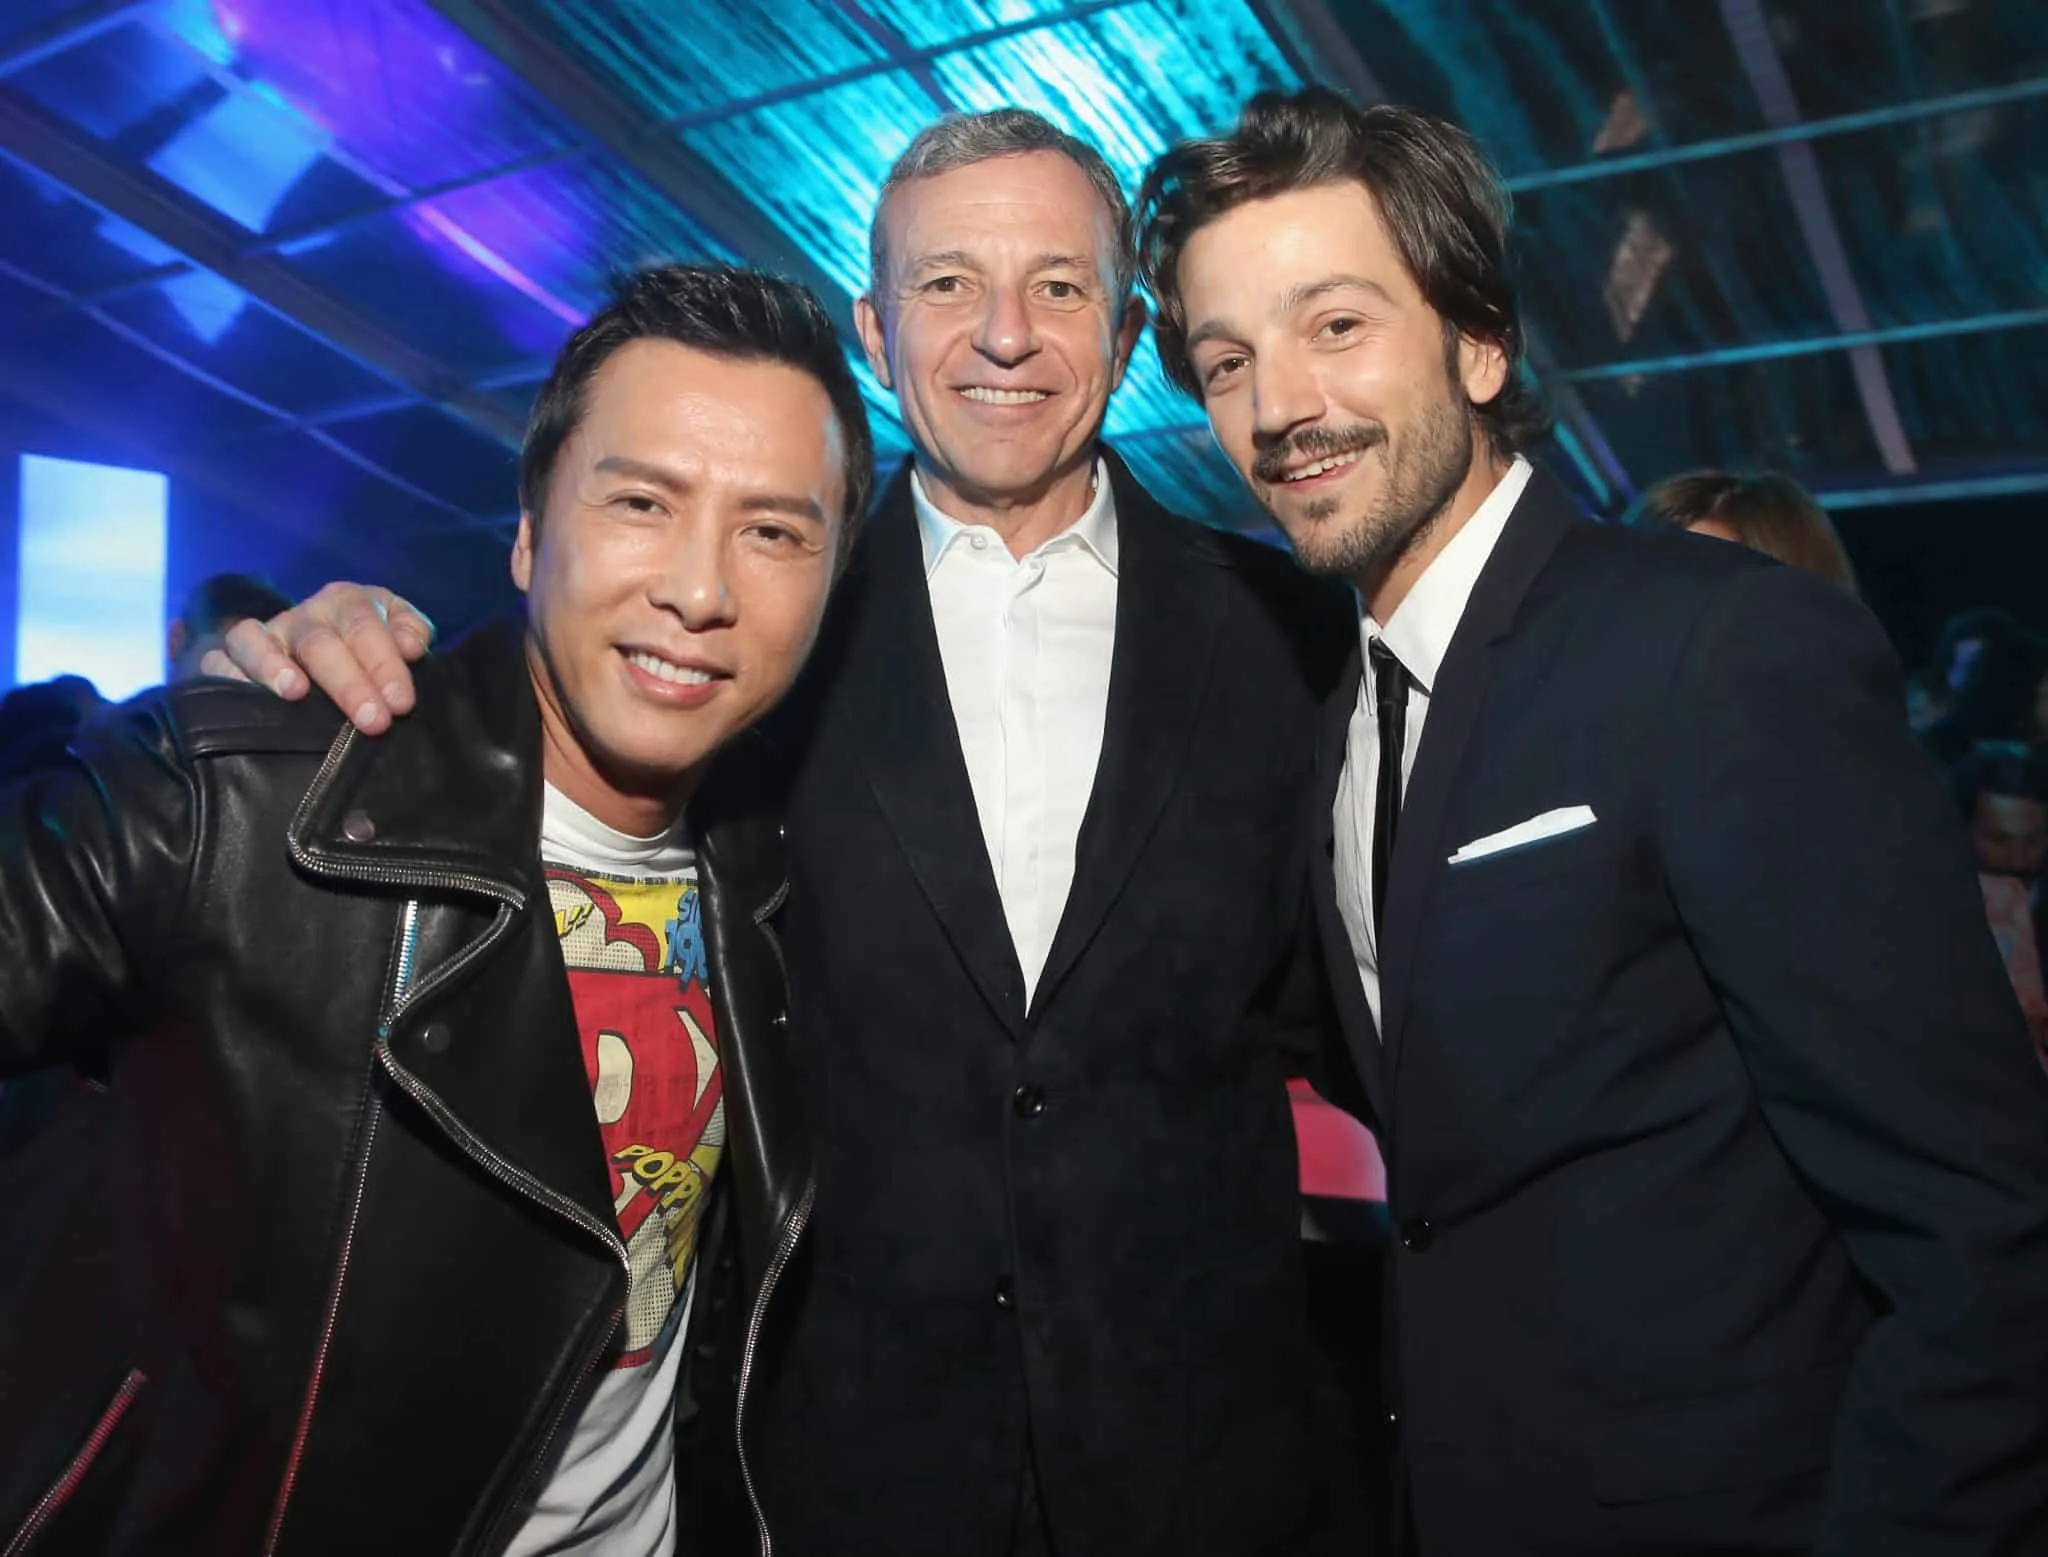 HOLLYWOOD, CA - DECEMBER 10: (L-R) Actor Donnie Yen, The Walt Disney Company Chairman and CEO Bob Iger and actor Diego Luna attend The World Premiere of Lucasfilm's highly anticipated, first-ever, standalone Star Wars adventure, "Rogue One: A Star Wars Story" at the Pantages Theatre on December 10, 2016 in Hollywood, California.  (Photo by Jesse Grant/Getty Images for Disney) *** Local Caption *** Donnie Yen; Bob Iger; Diego Luna